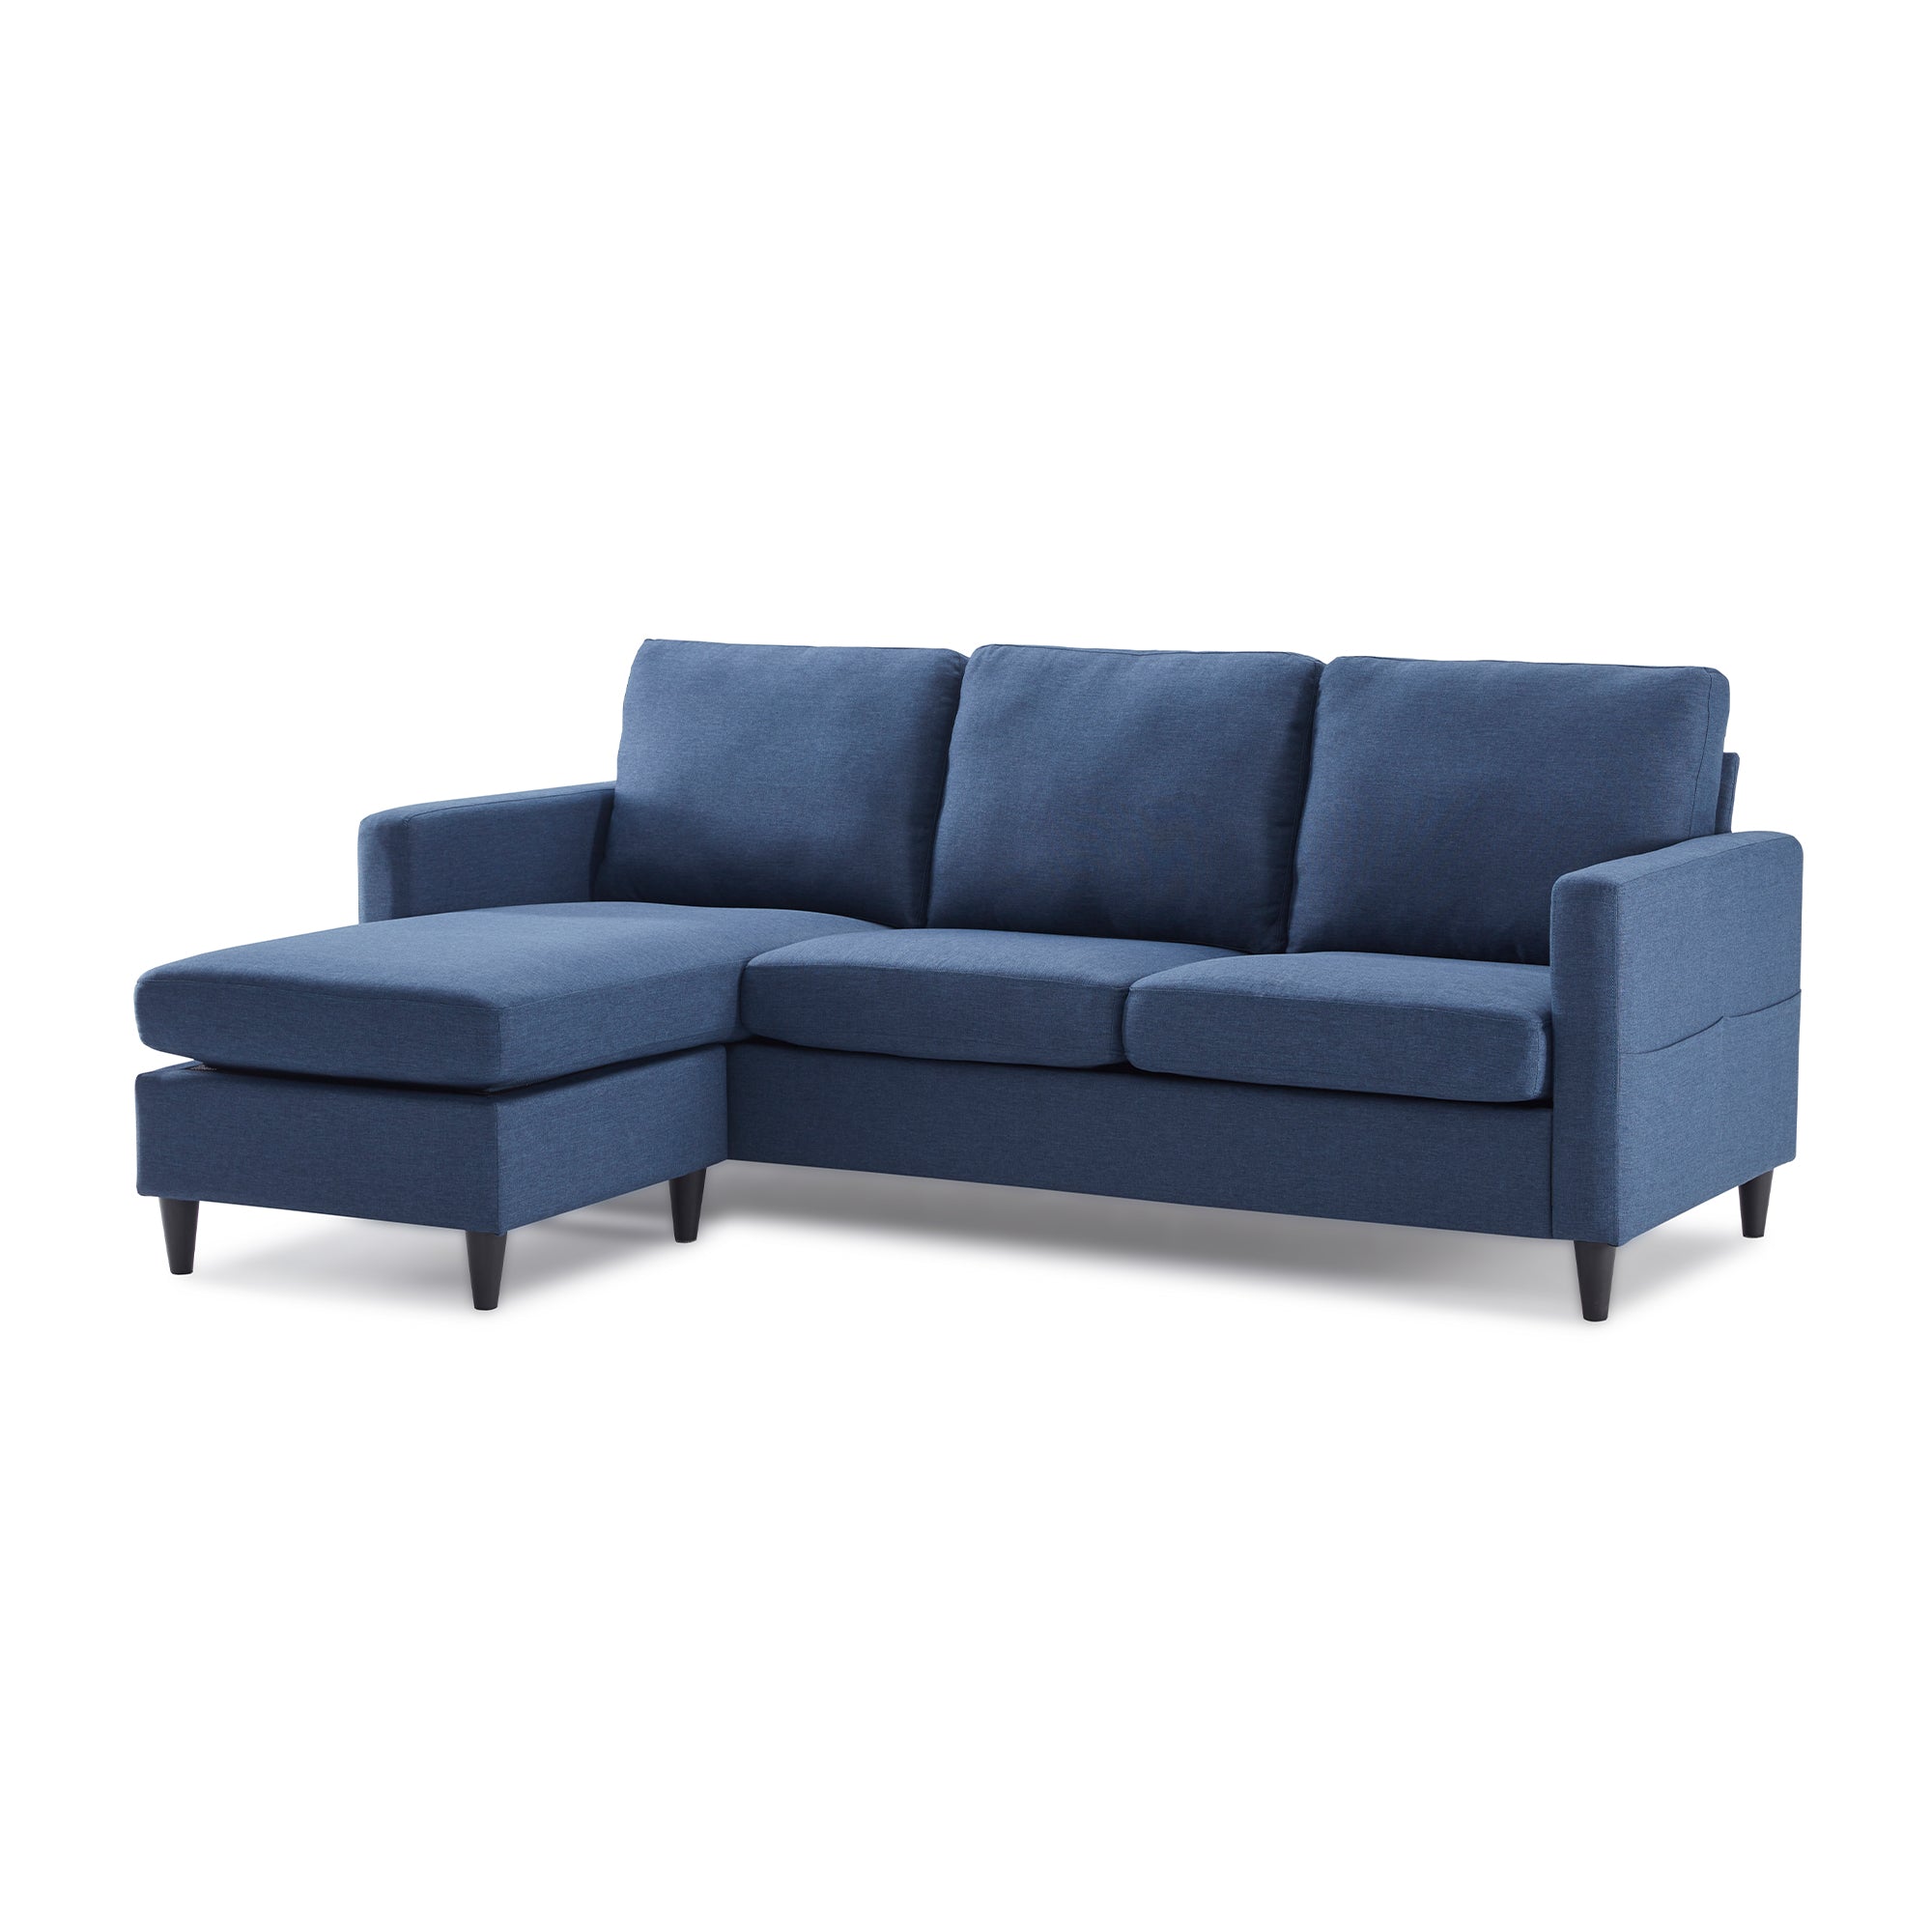 3-Seater Reversible Sectional Sofa with Handy Side Pocket-Boyel Living